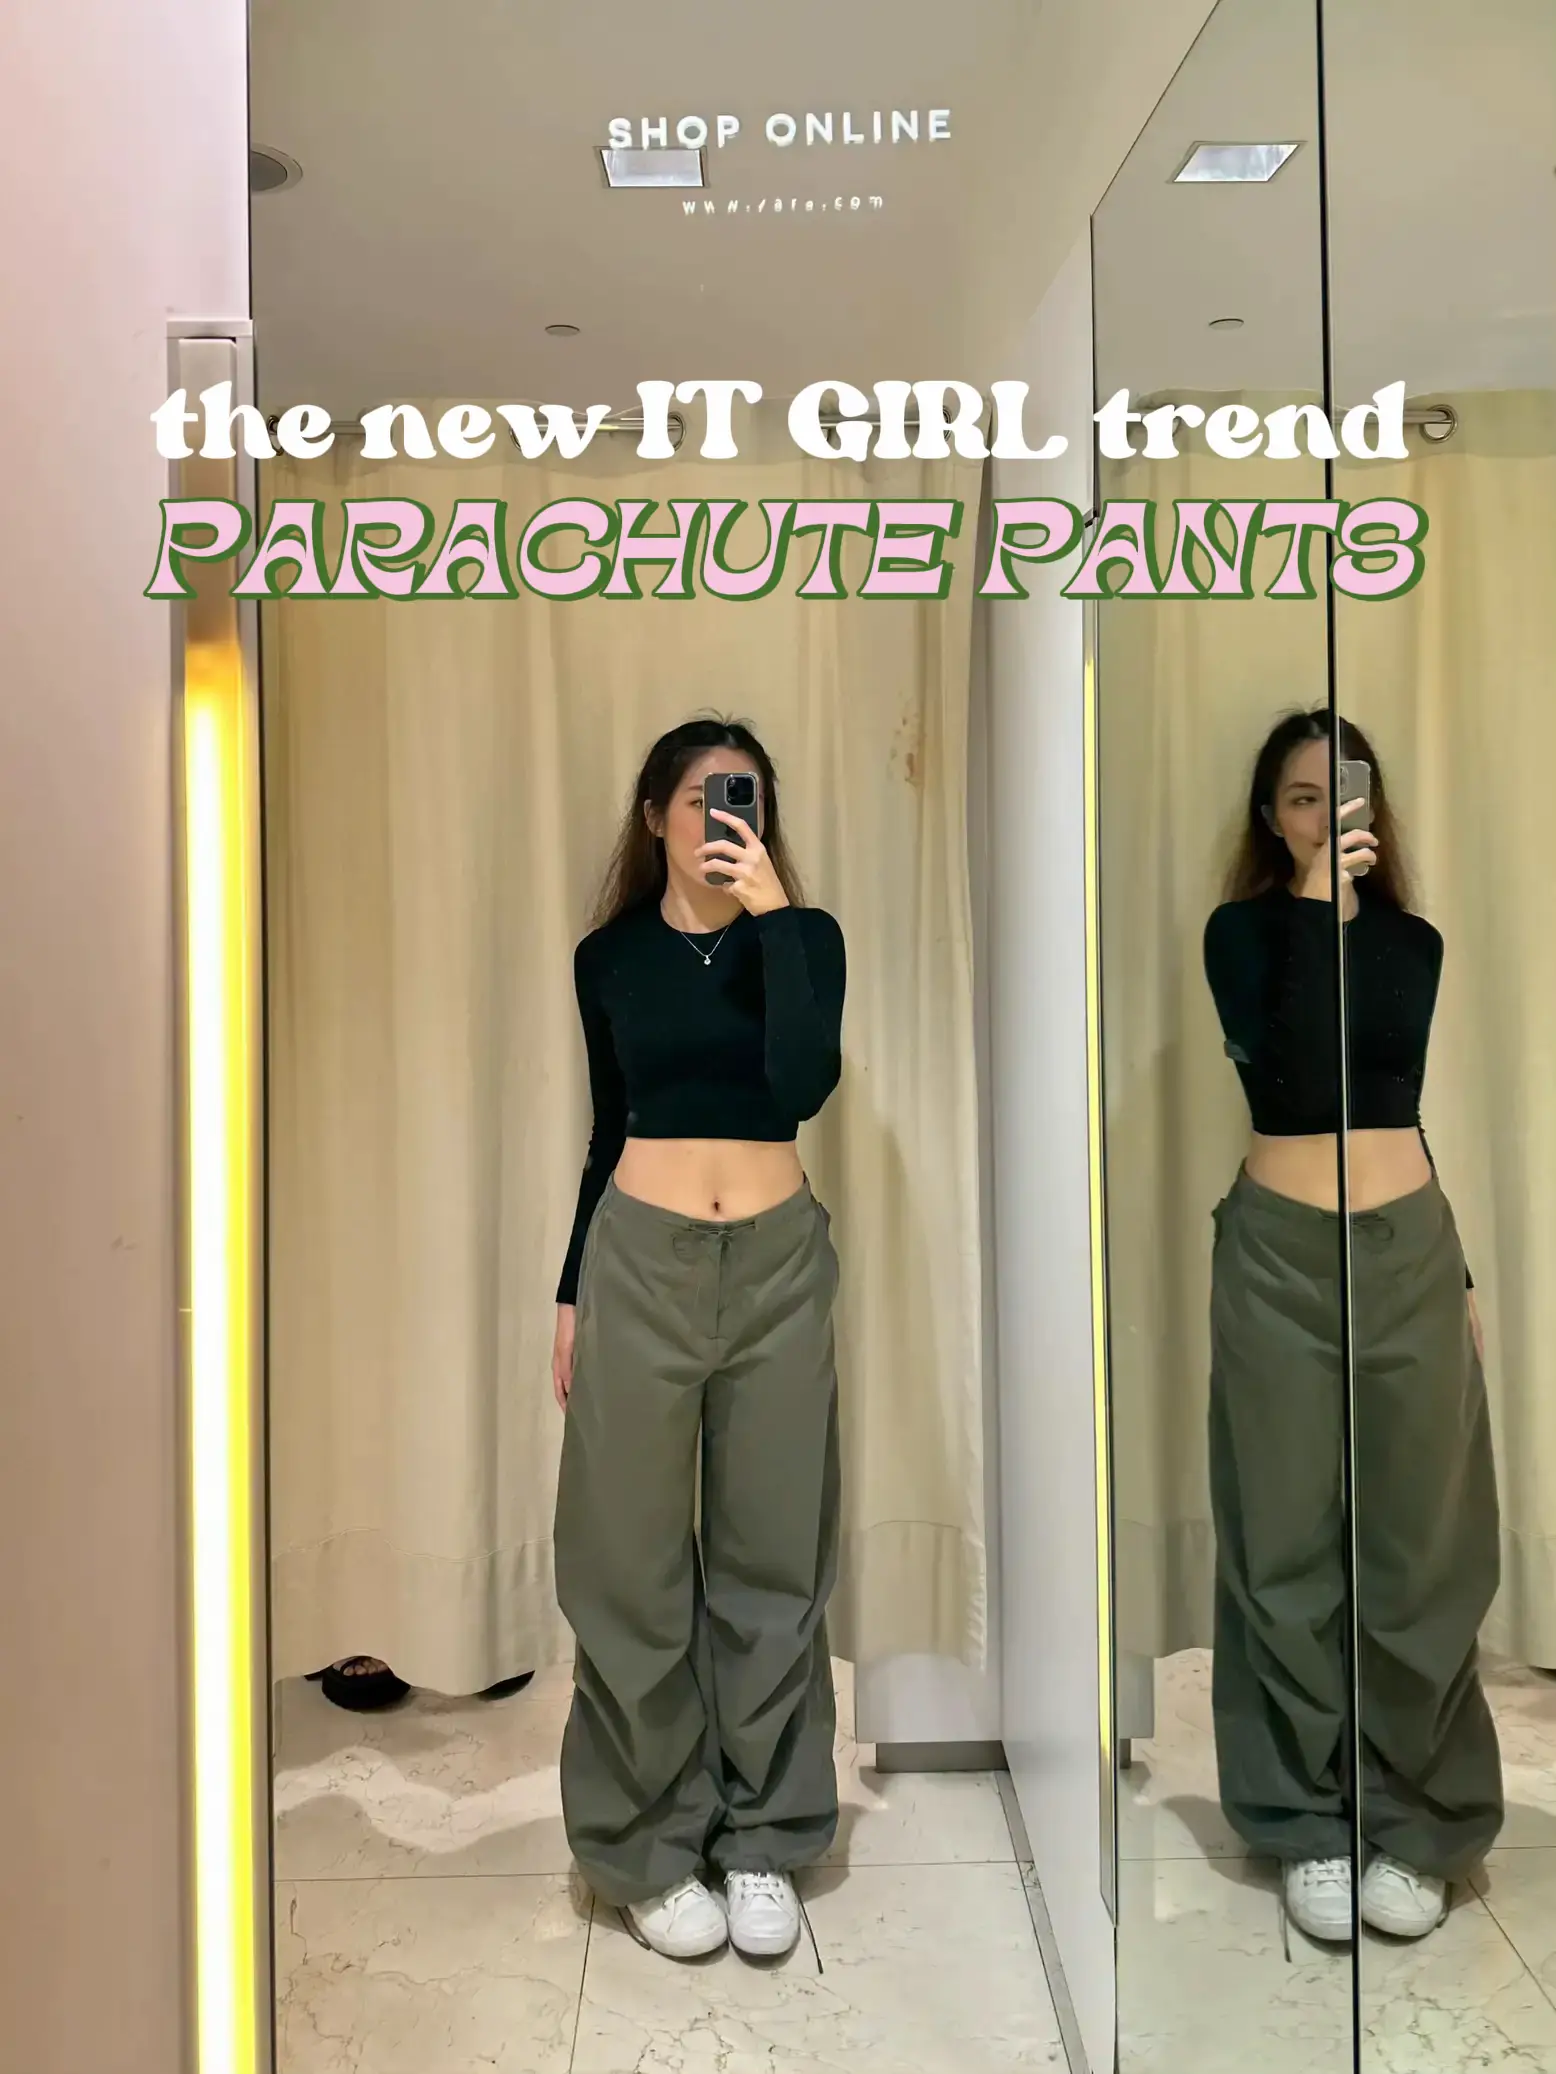 the new IT GIRL trend: parachute pants, Gallery posted by Liang